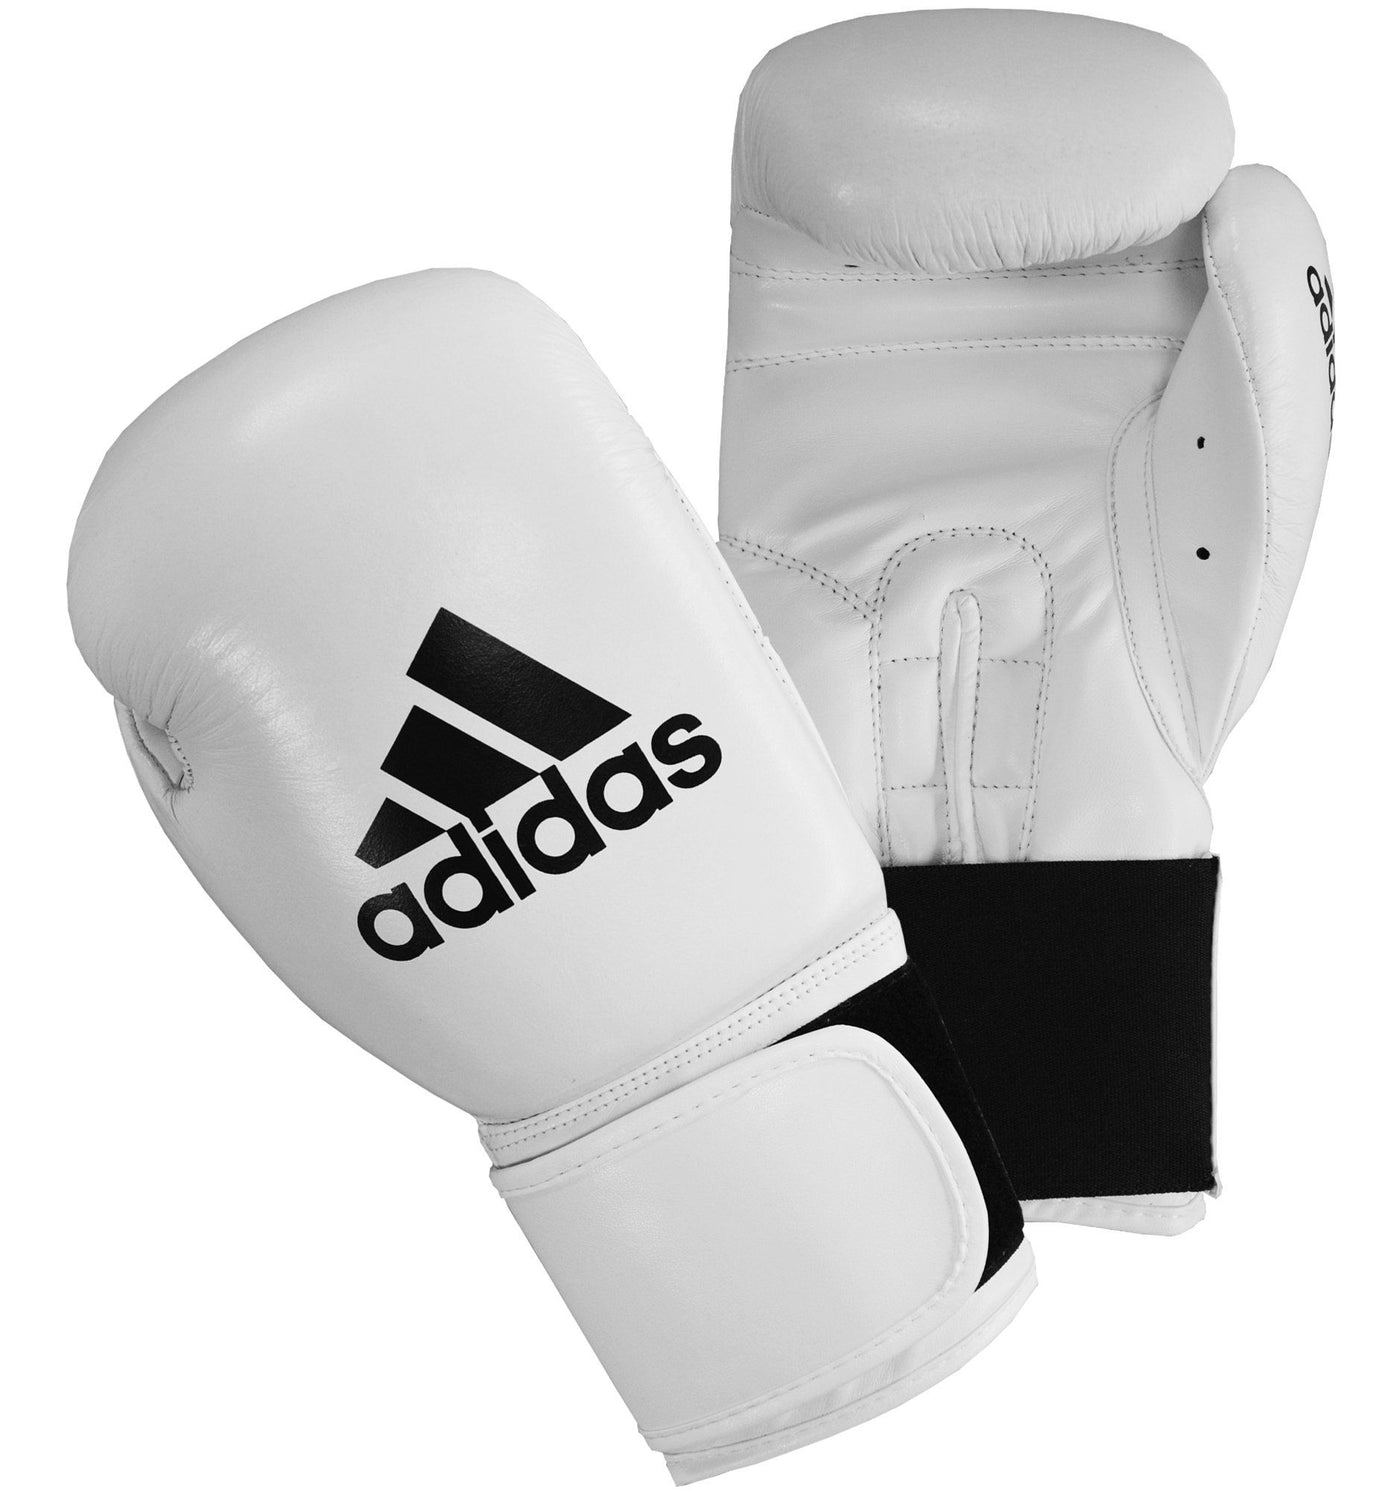 ADIDAS PERFORMER BOXING GLOVES